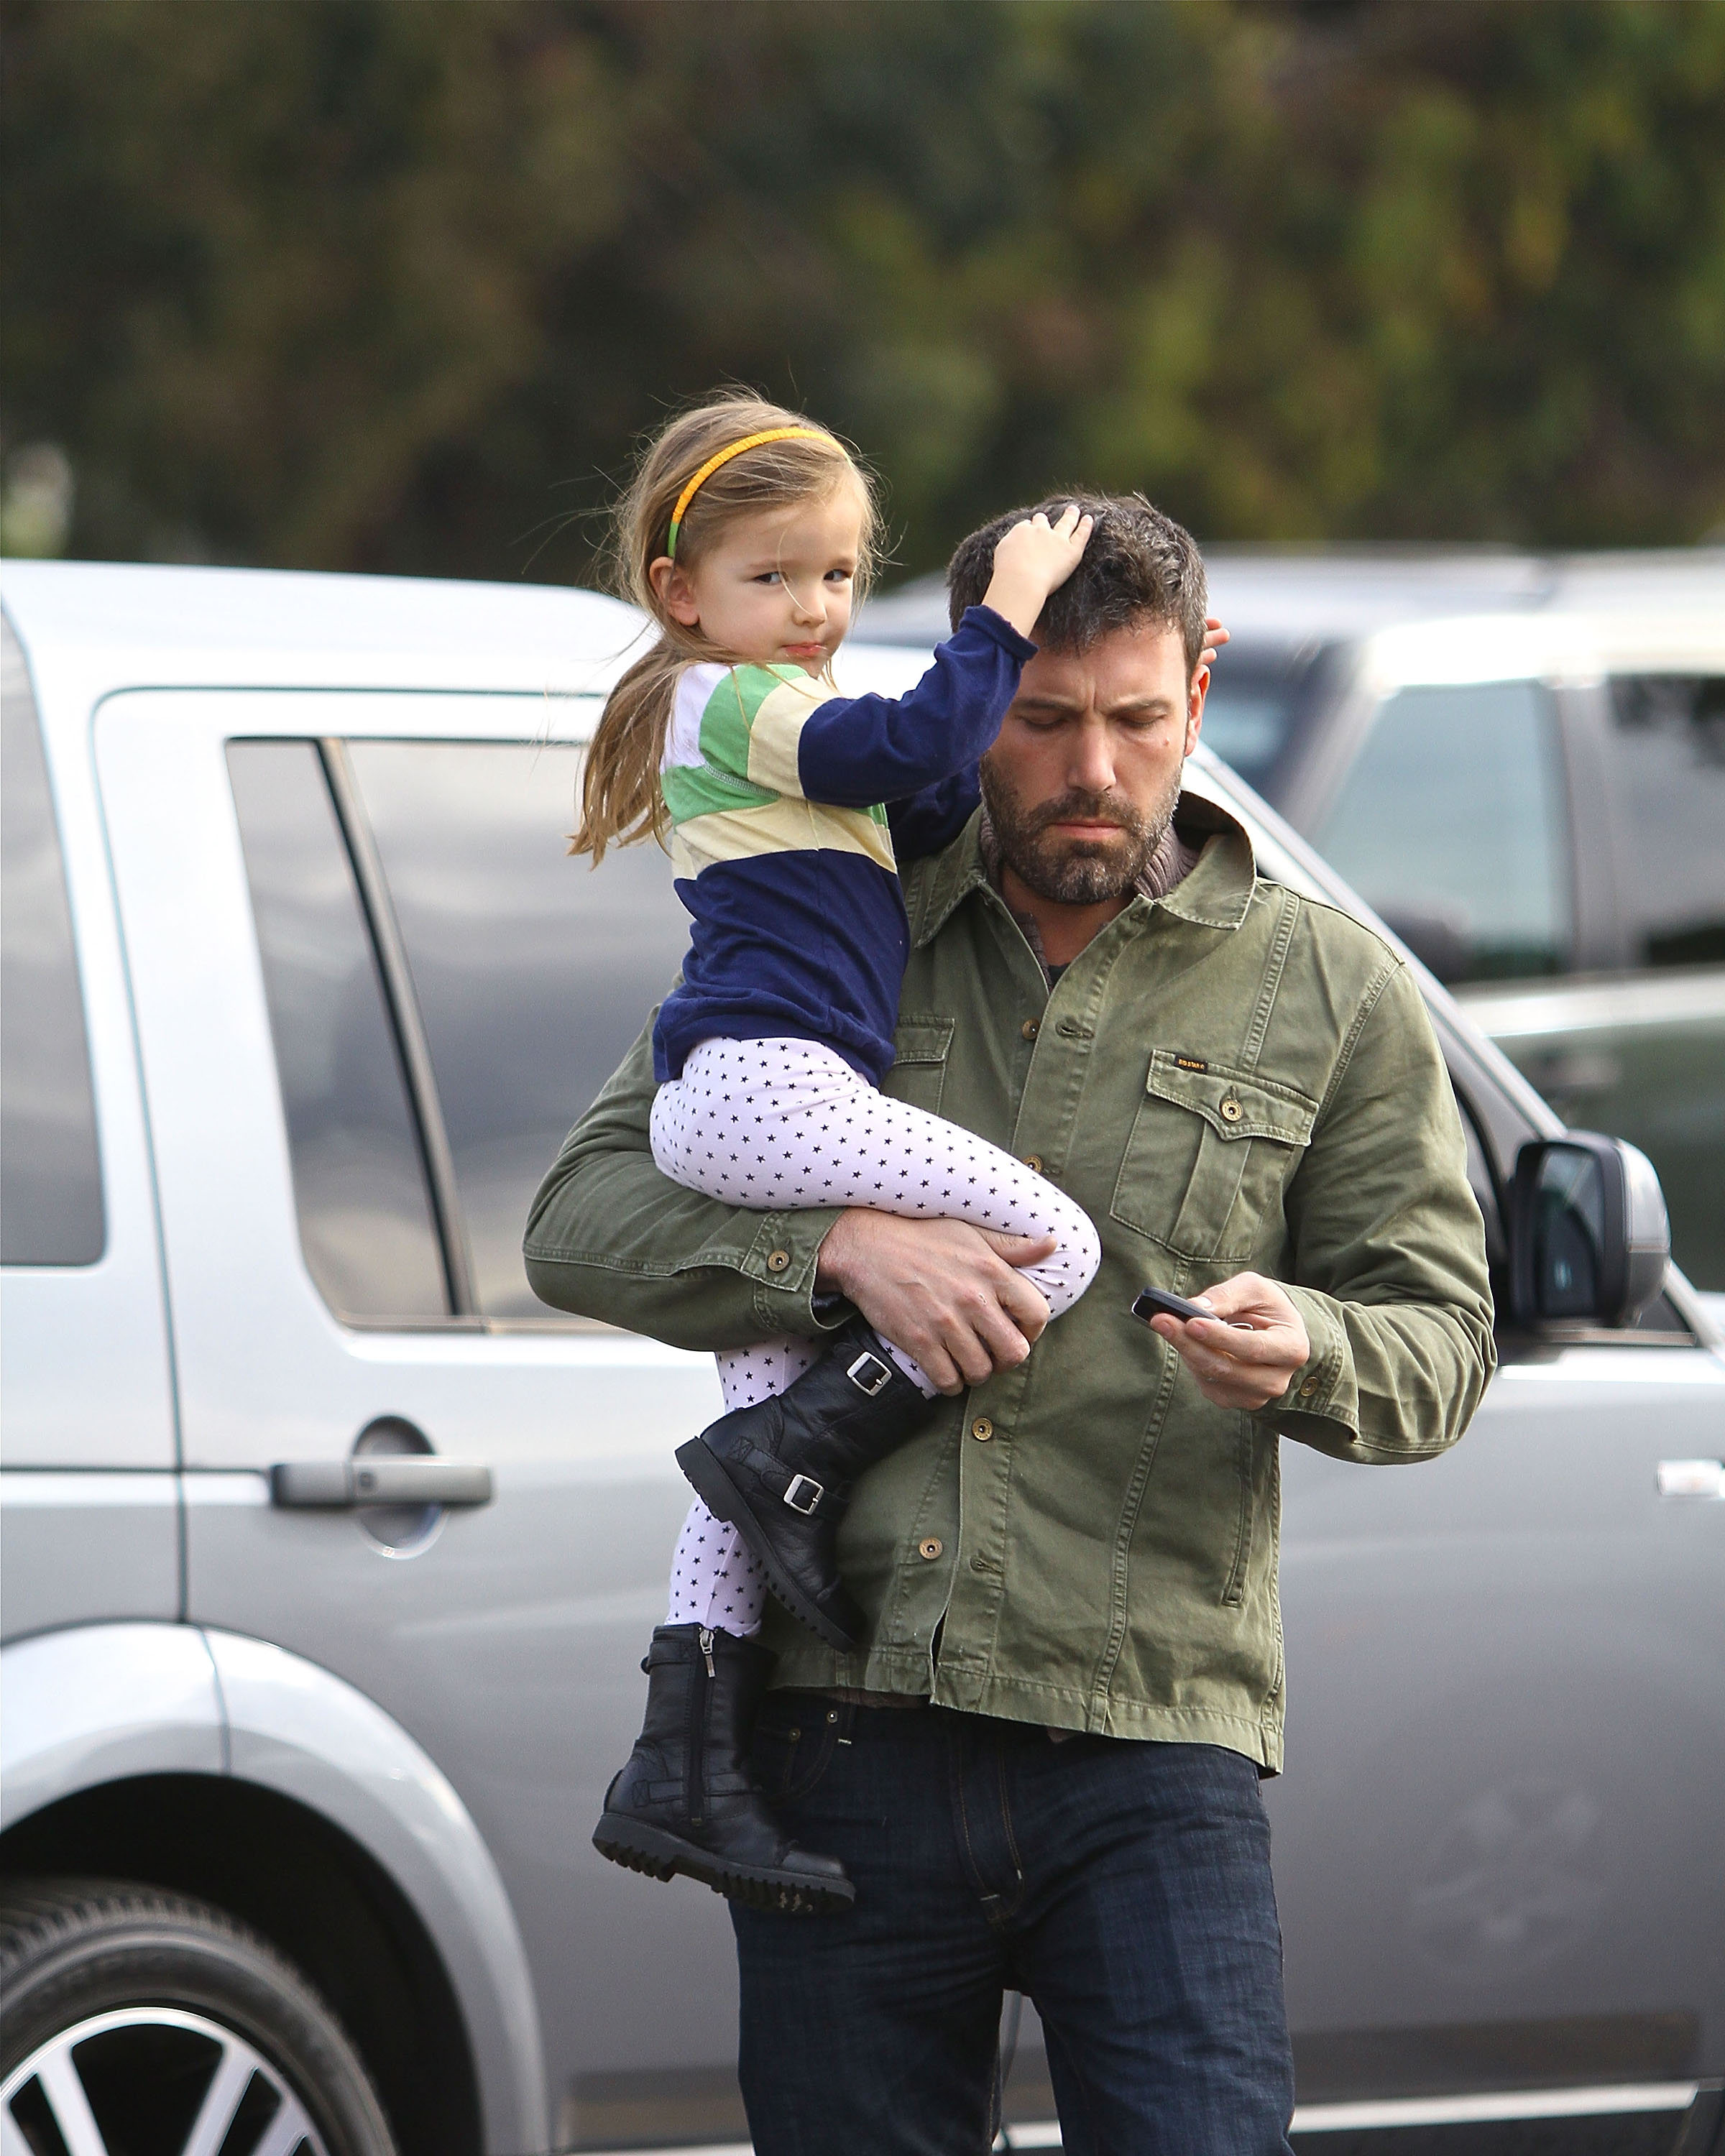 Ben Affleck and Seraphina Affleck in Brentwood on December 23, 2012 in Los Angeles, California. | Source: Getty Images